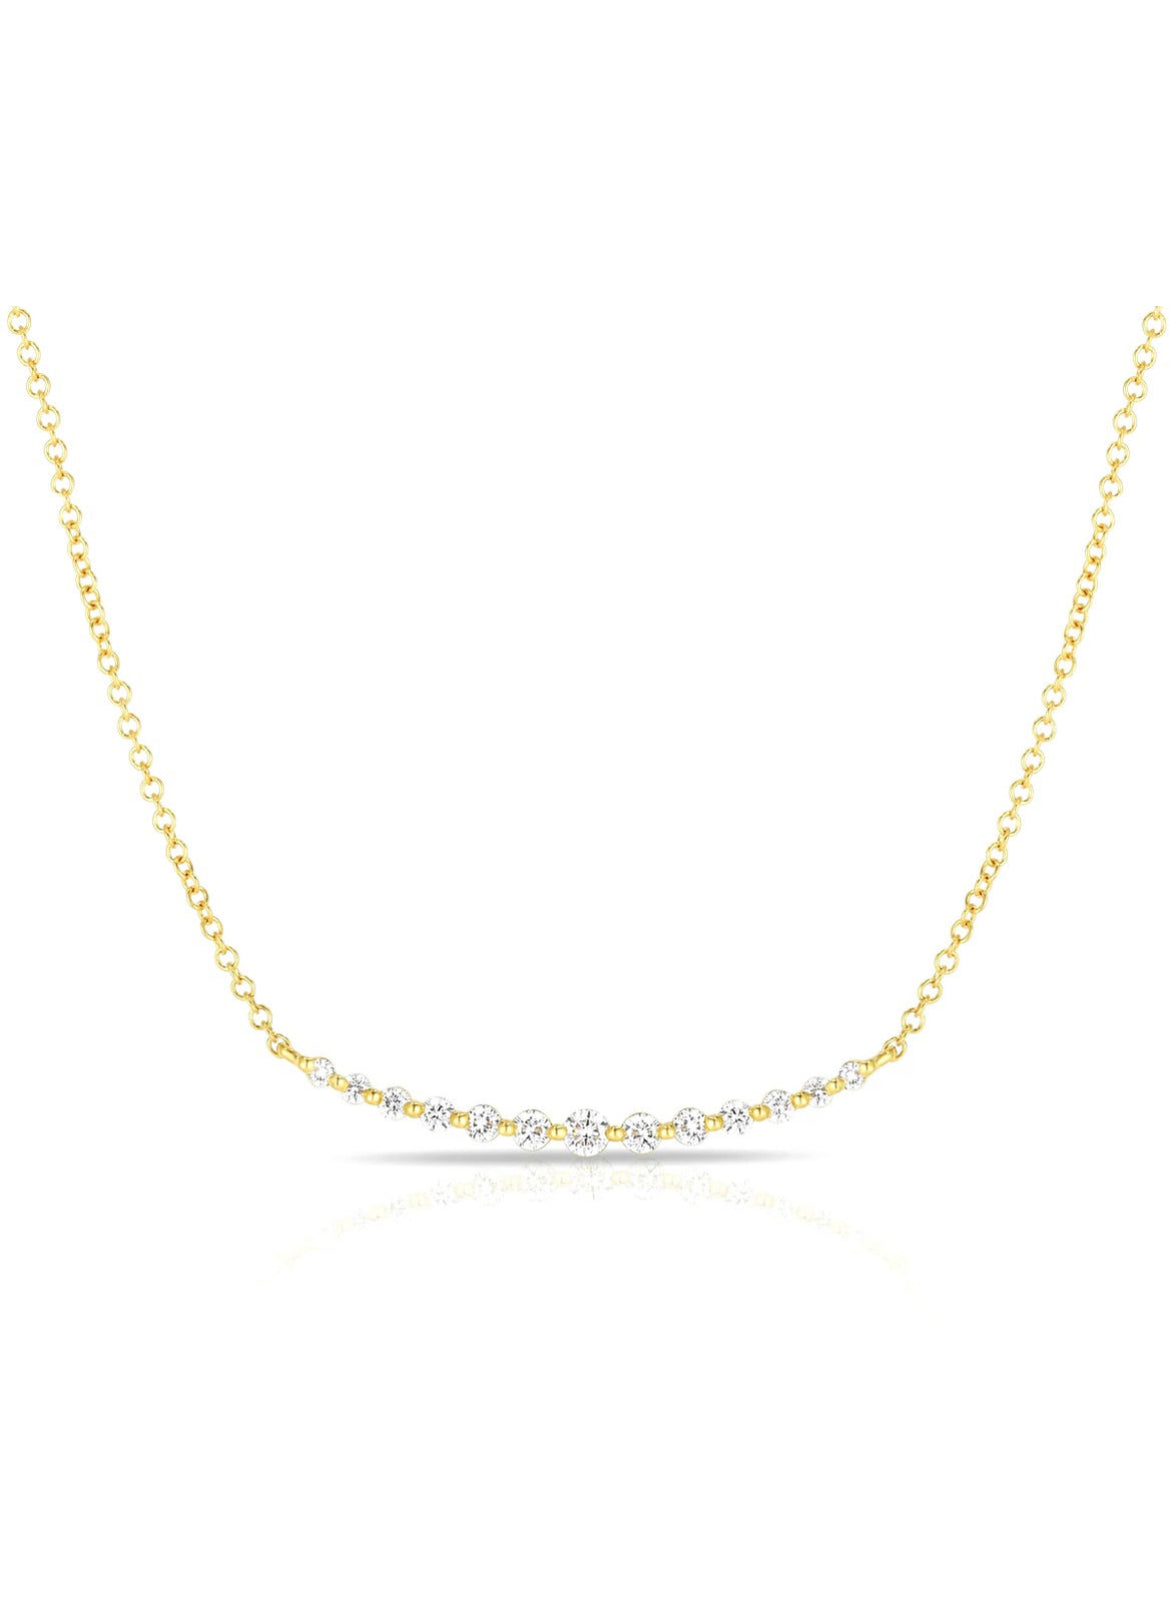 Curved Diamond Prong Necklace